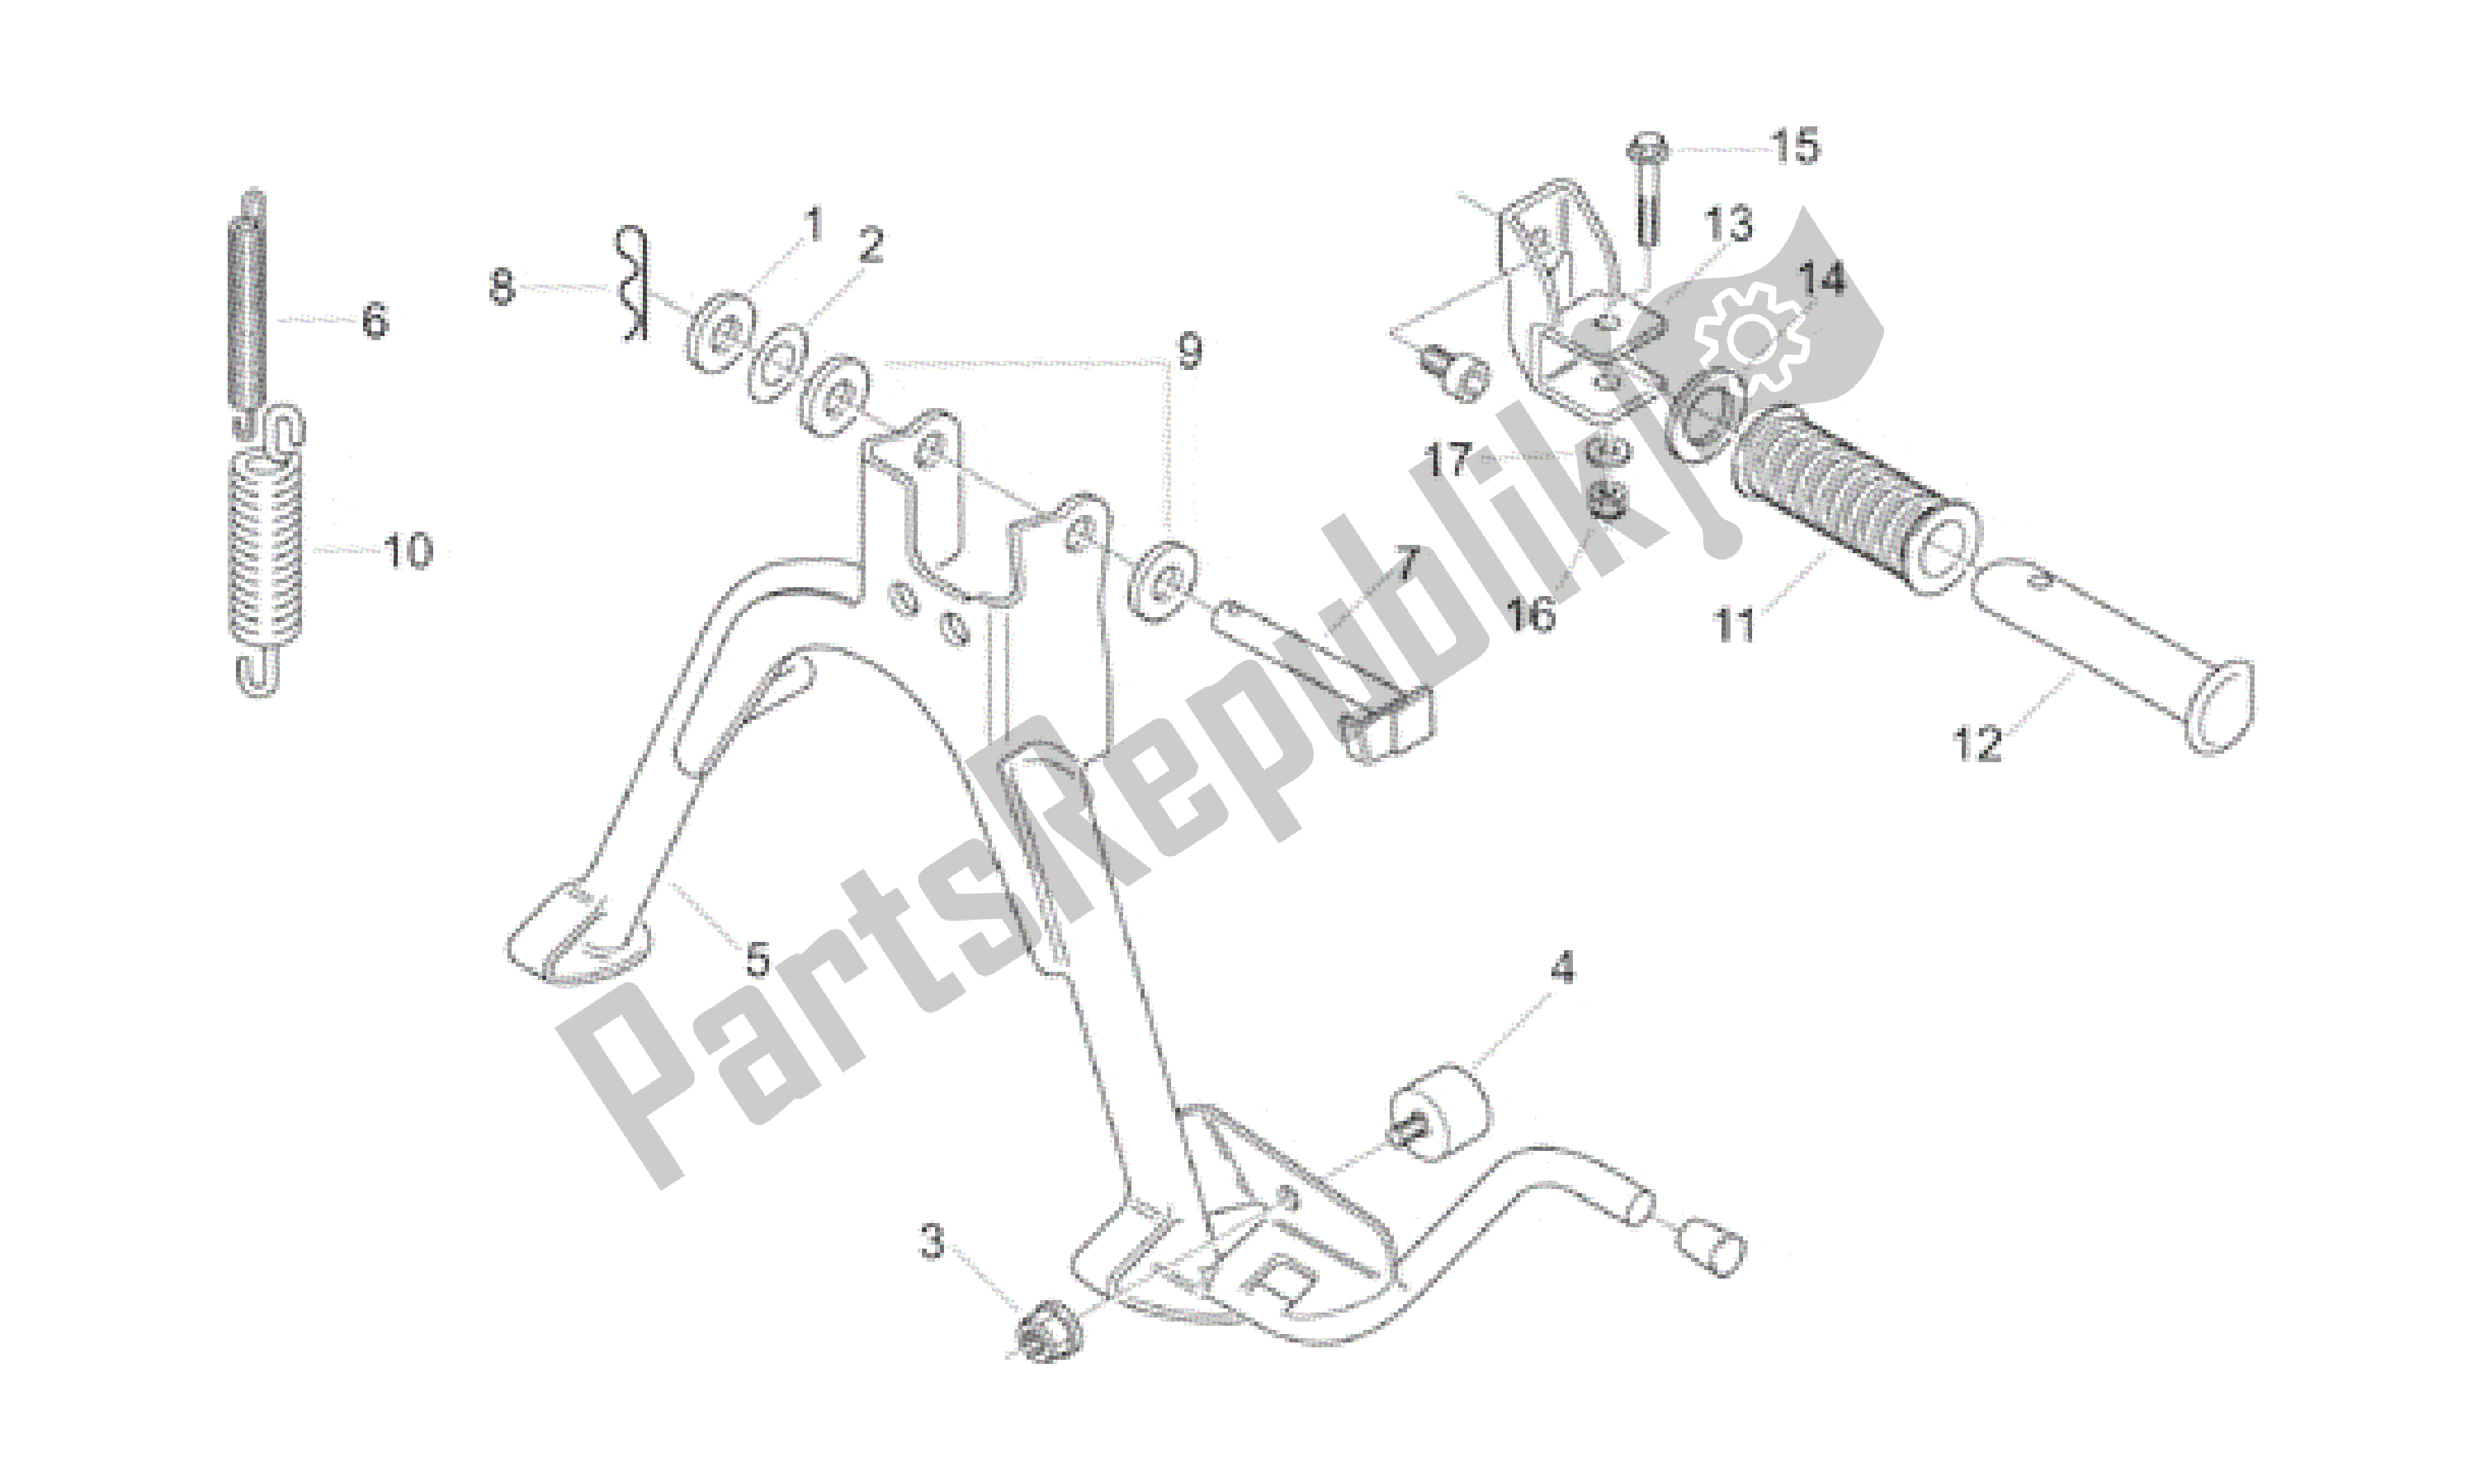 All parts for the Foot Rests - Lateral Stand of the Aprilia Scarabeo 50 1998